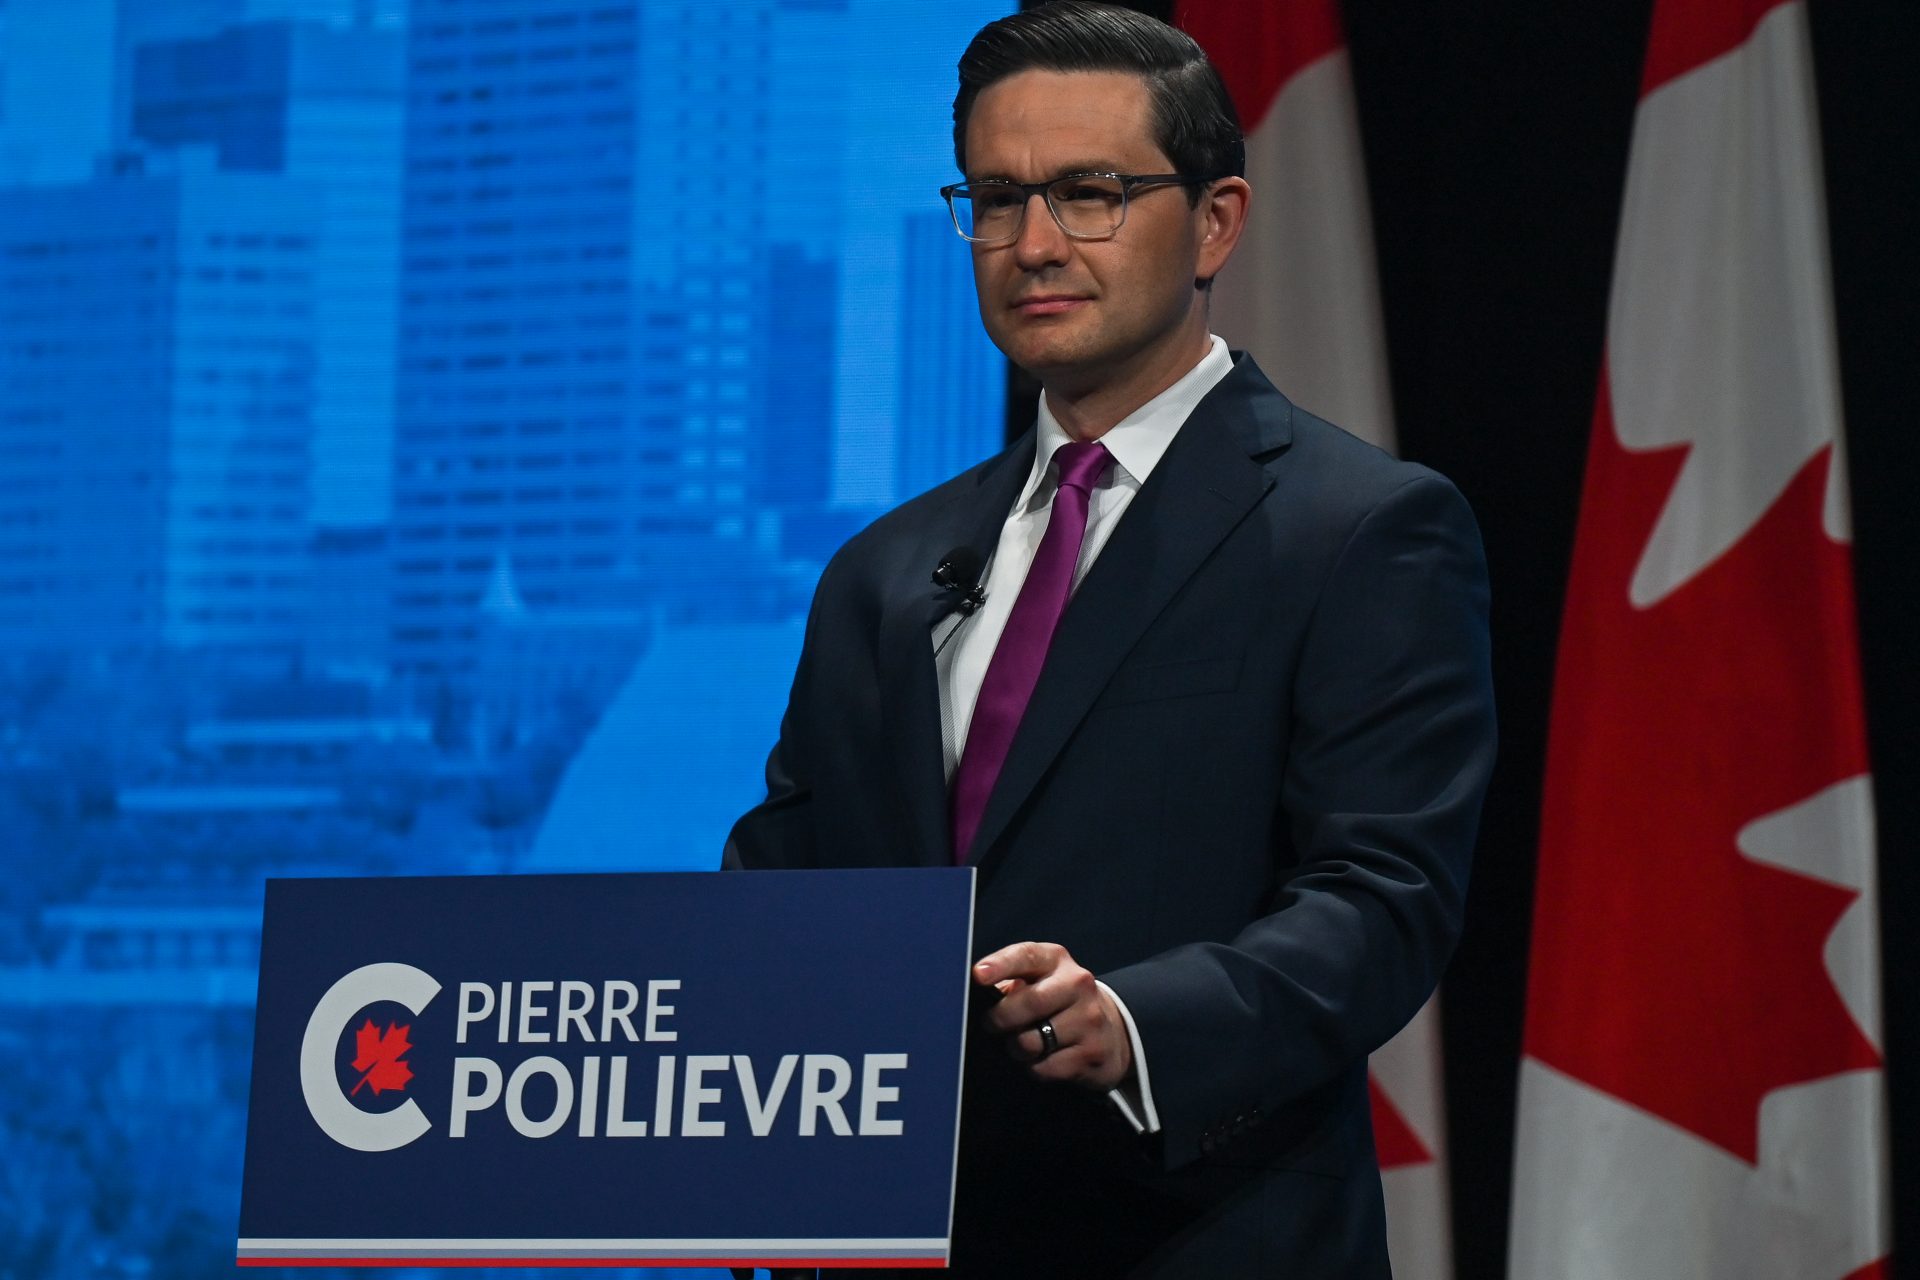 Trudeau may be set to lose his next election to Pierre Poilievre